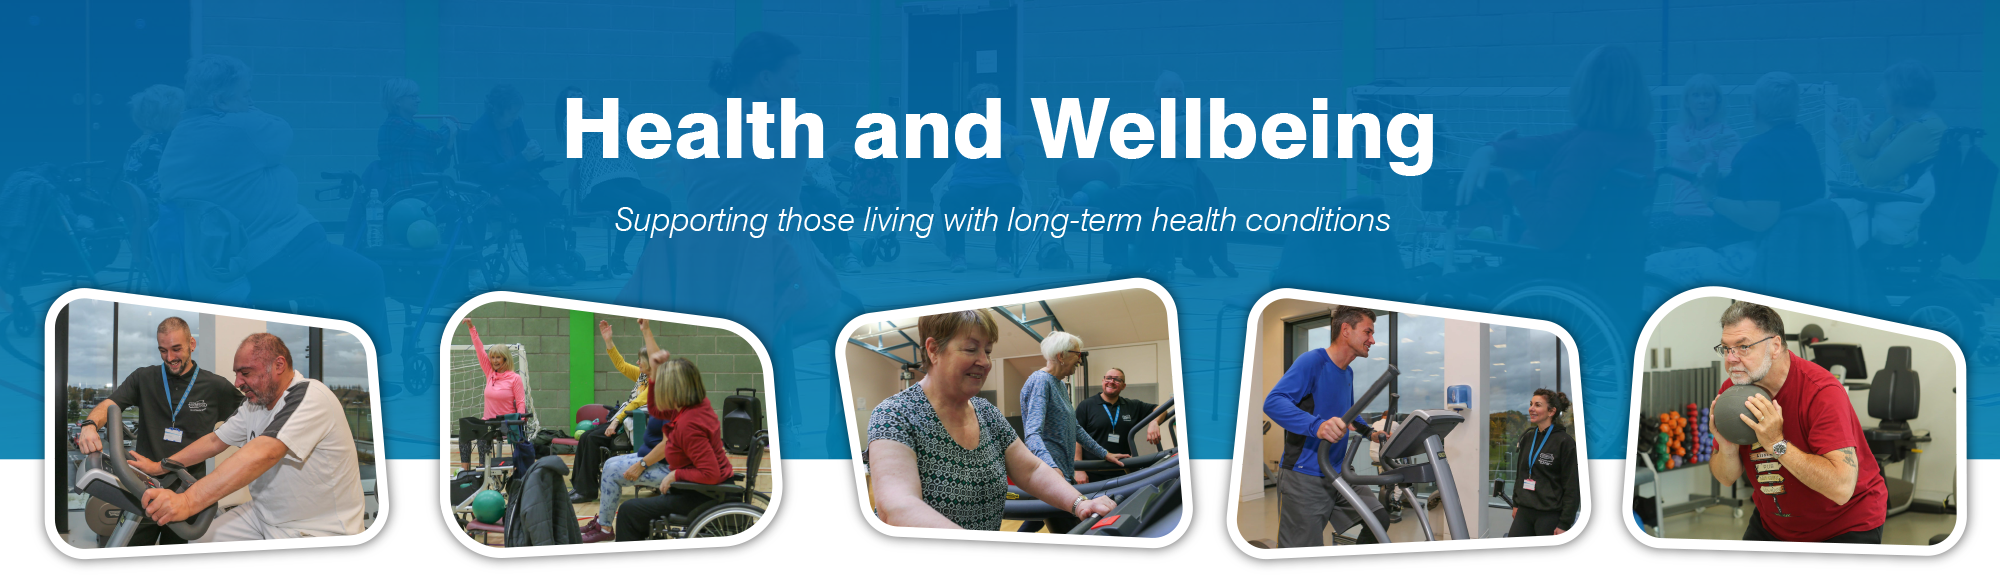 Health and Wellbeing in Fife